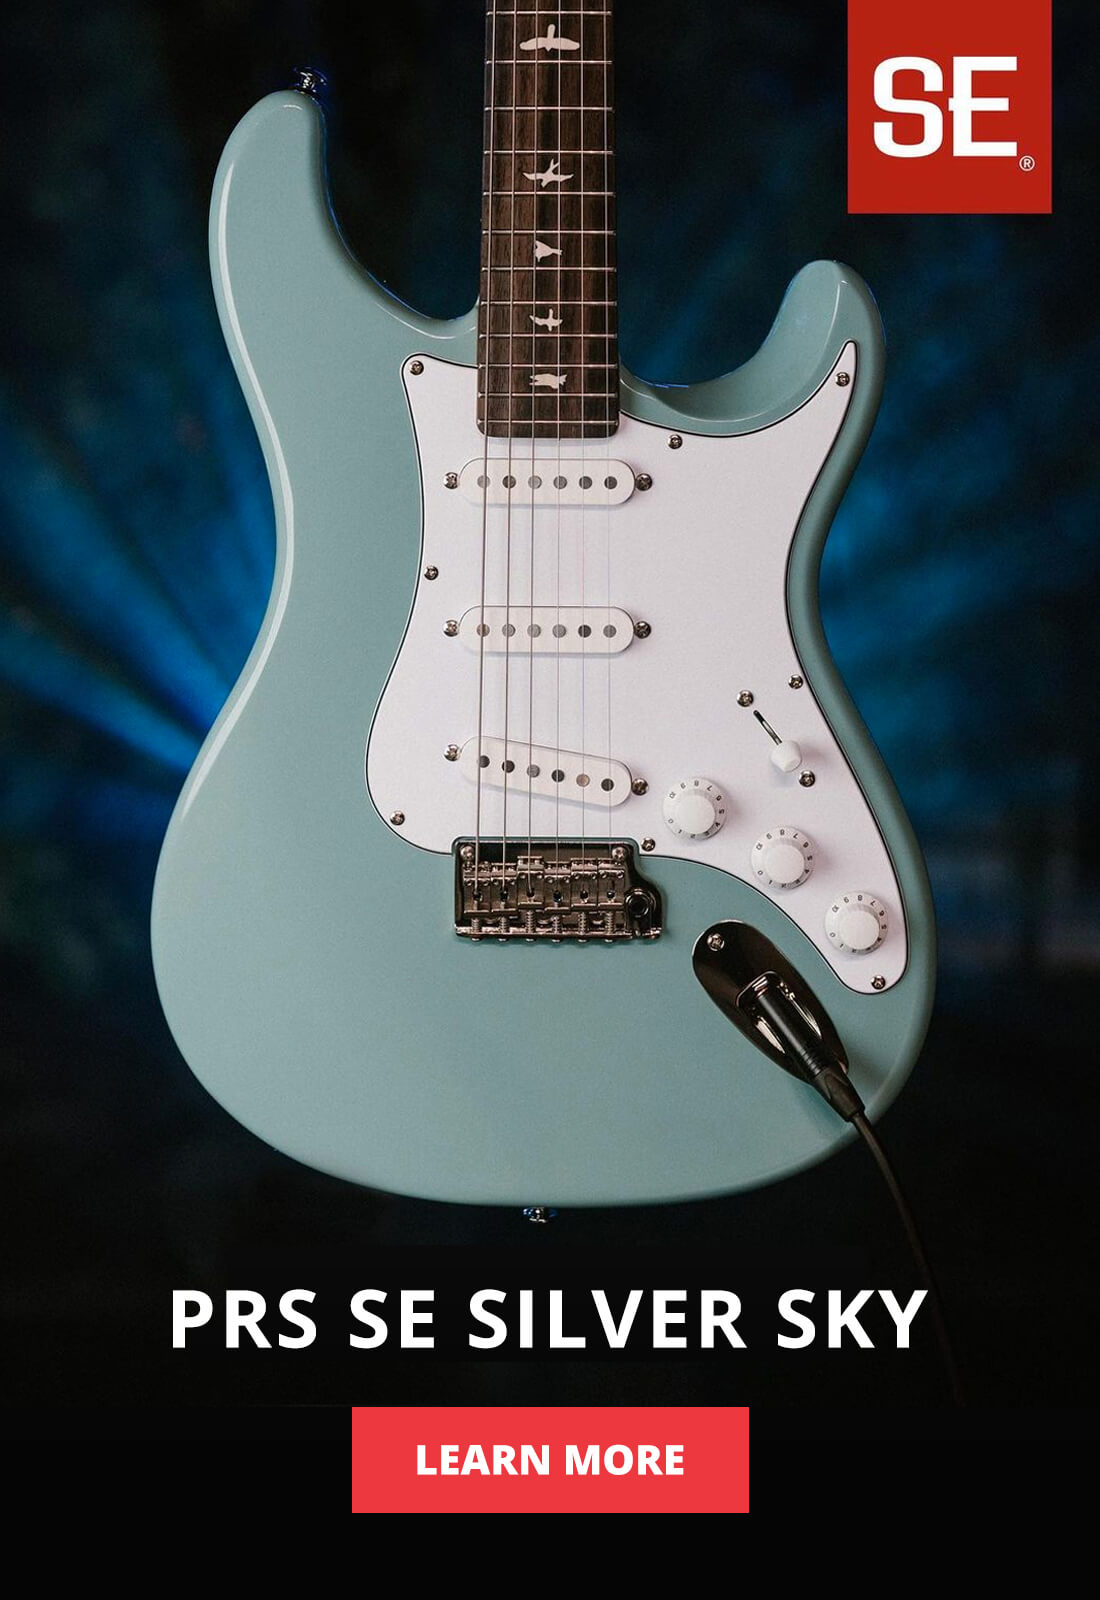 The brand new PRS SE Silver Sky John Mayer Signature model guitar - find out more!